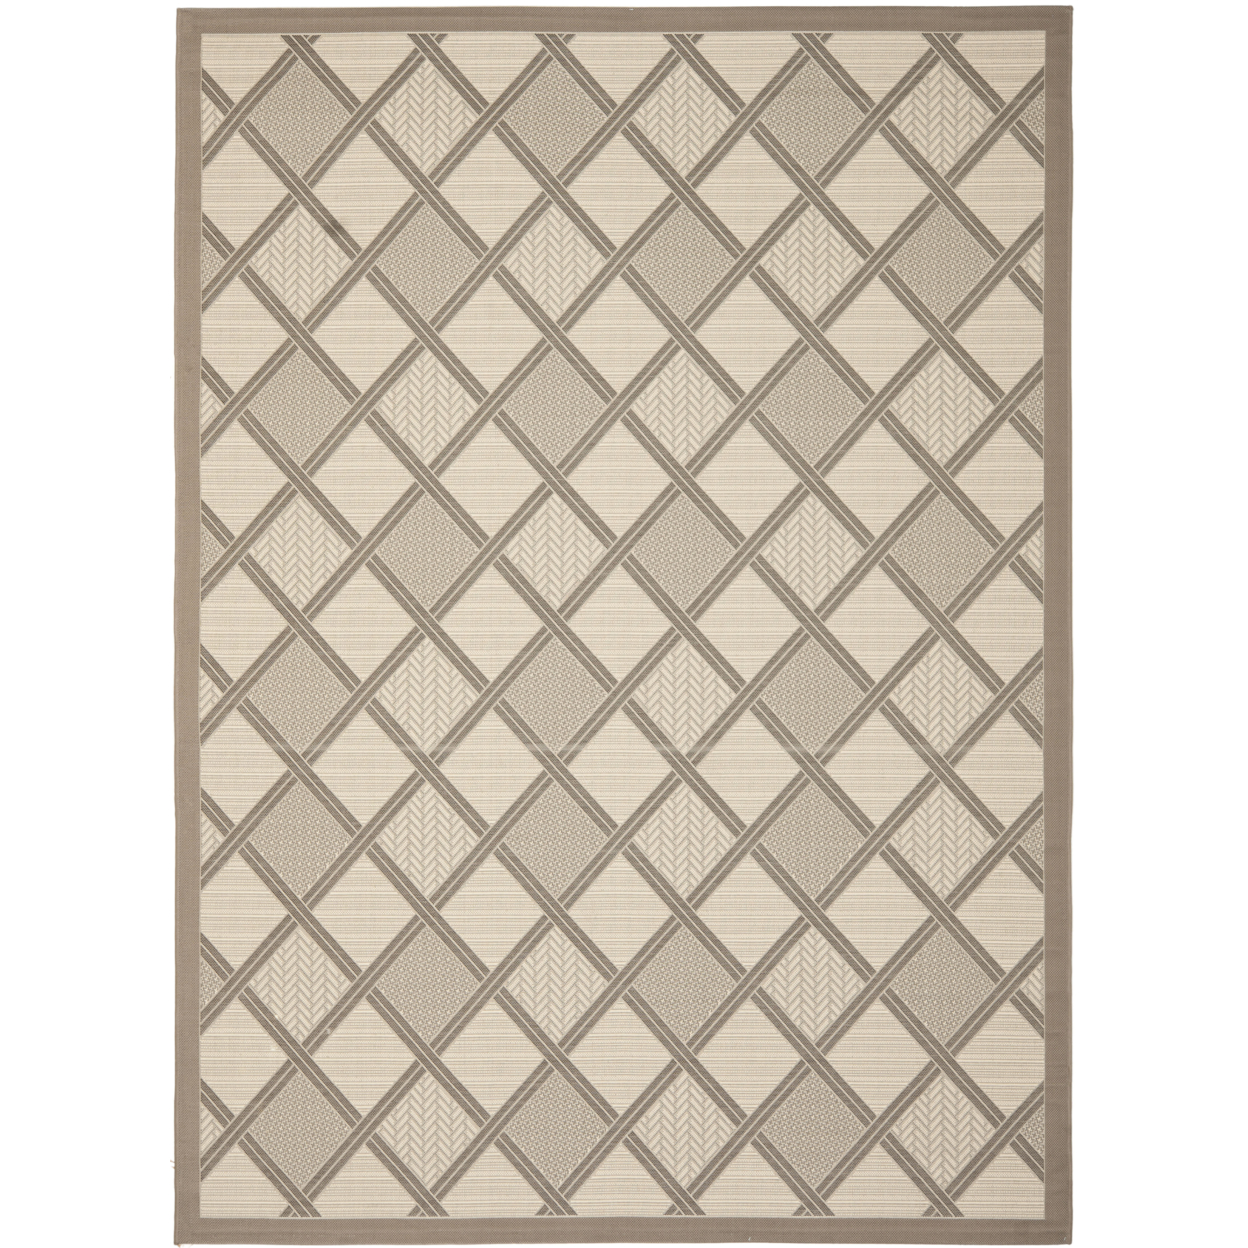 SAFAVIEH Outdoor CY7570-79A7 Courtyard Collection Beige Rug - 4' X 5' 7